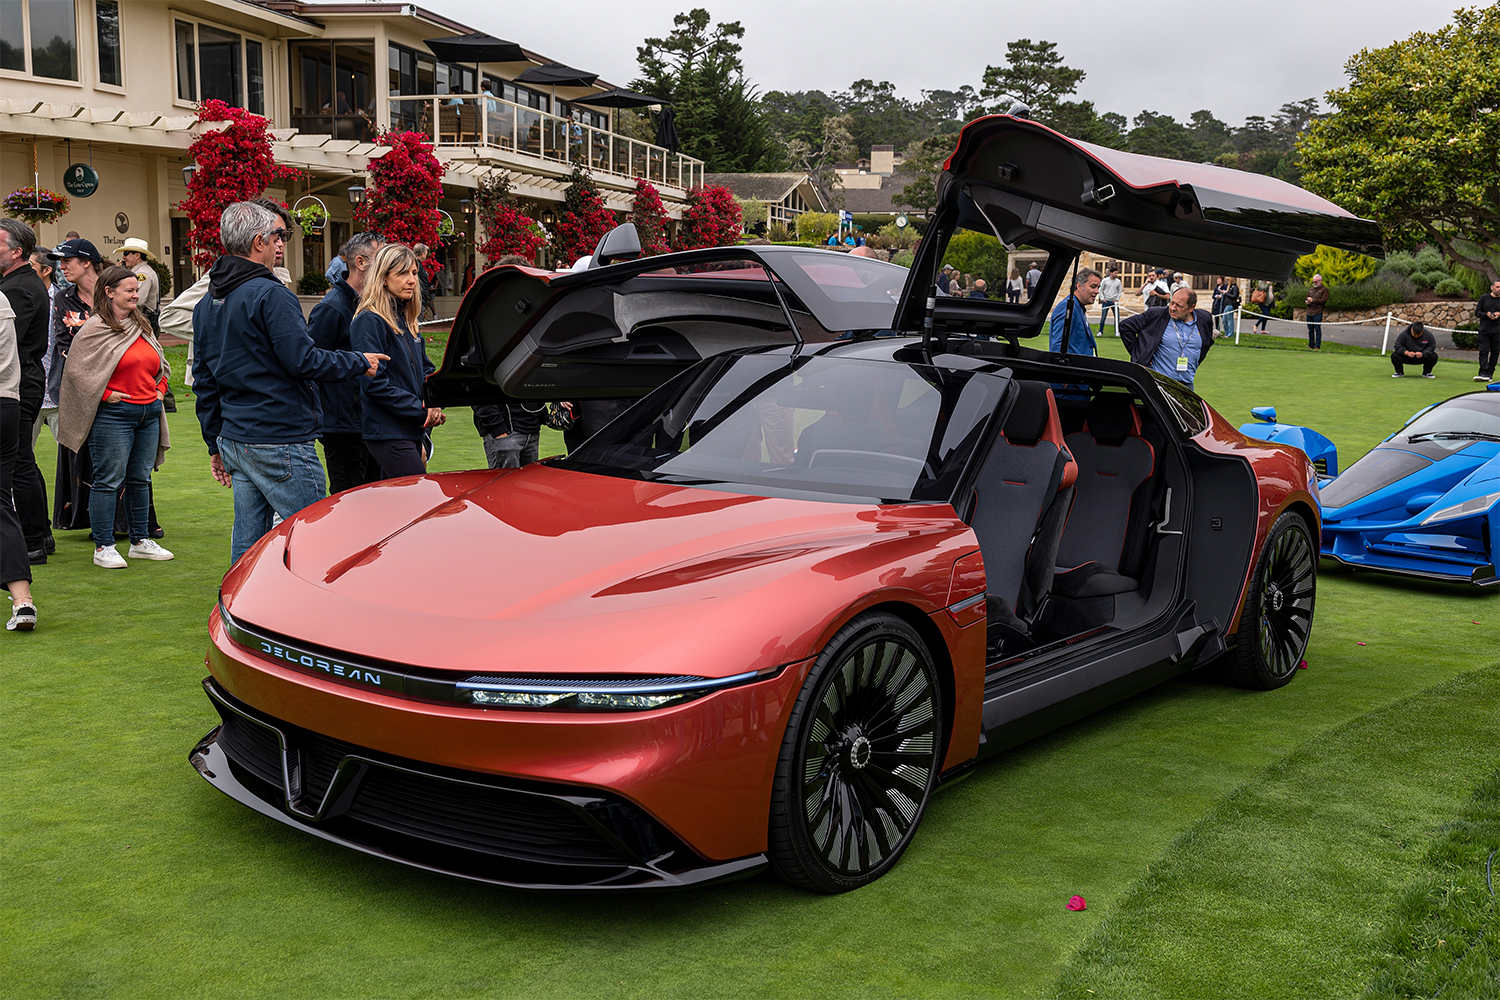 The DeLorean Alpha5, an electric vehicle from the revamped company behind the DMC-12, displayed at the Pebble Beach Concours d’Elegance at Monterey Car Week